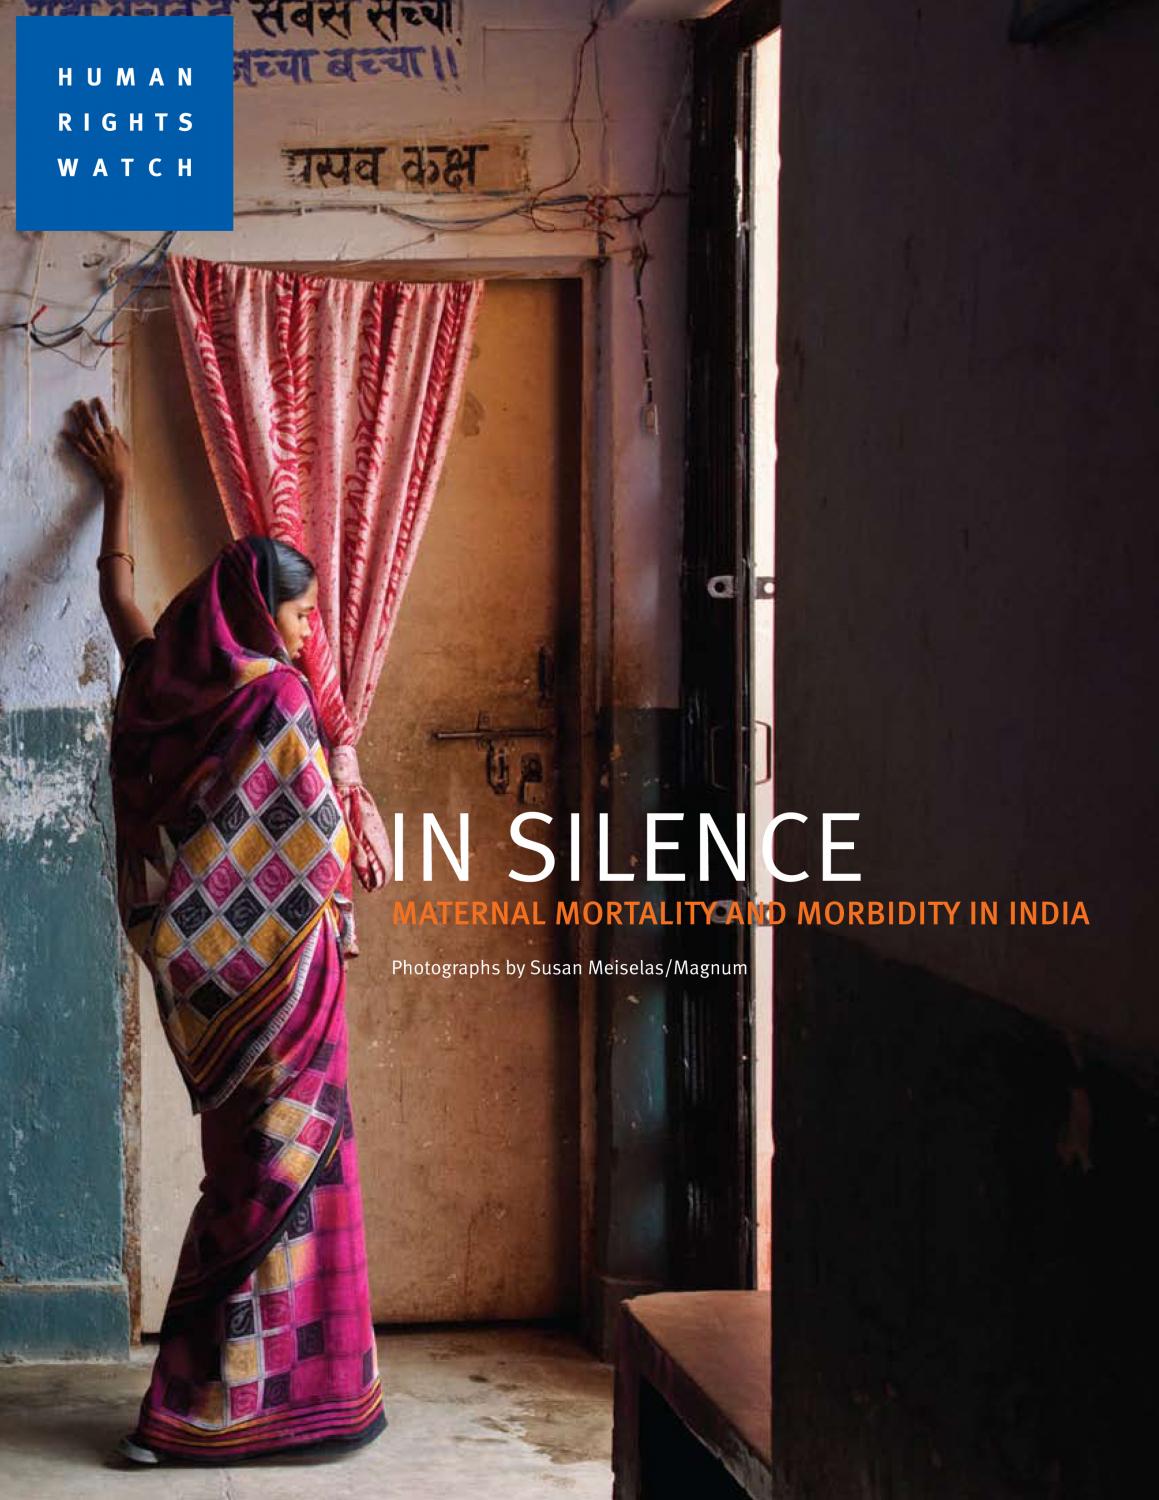 Maternal Mortality, India (2009) Tearsheets - Human Rights Watch Brochure "In Silence".